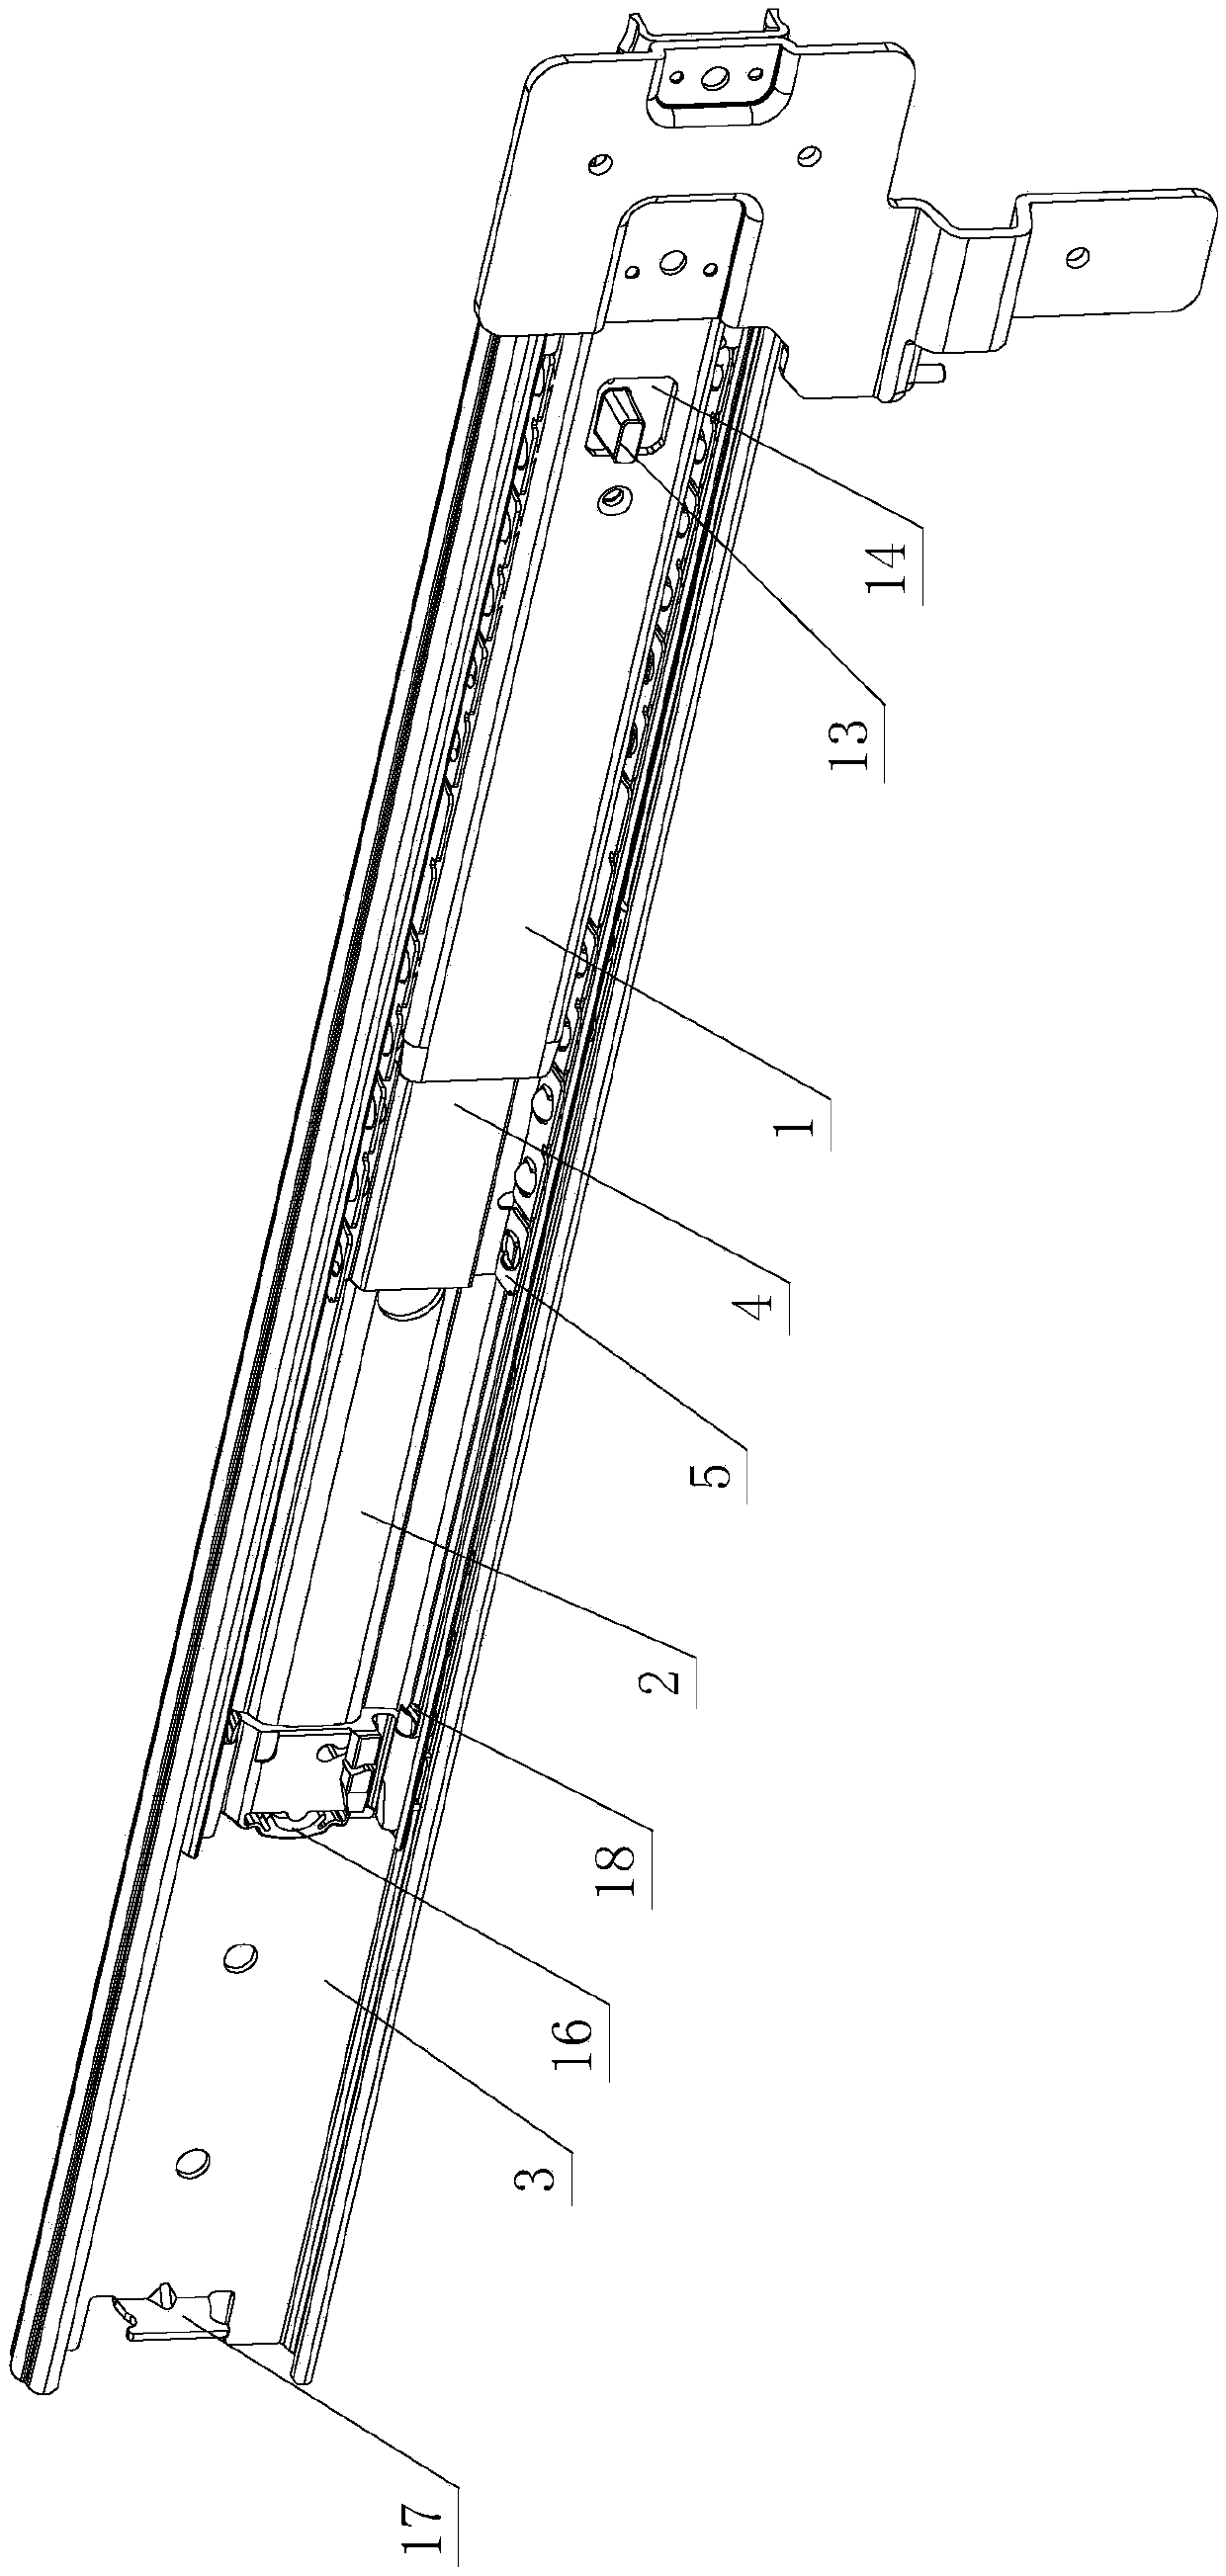 Mute opening and closing structure for sliding rails